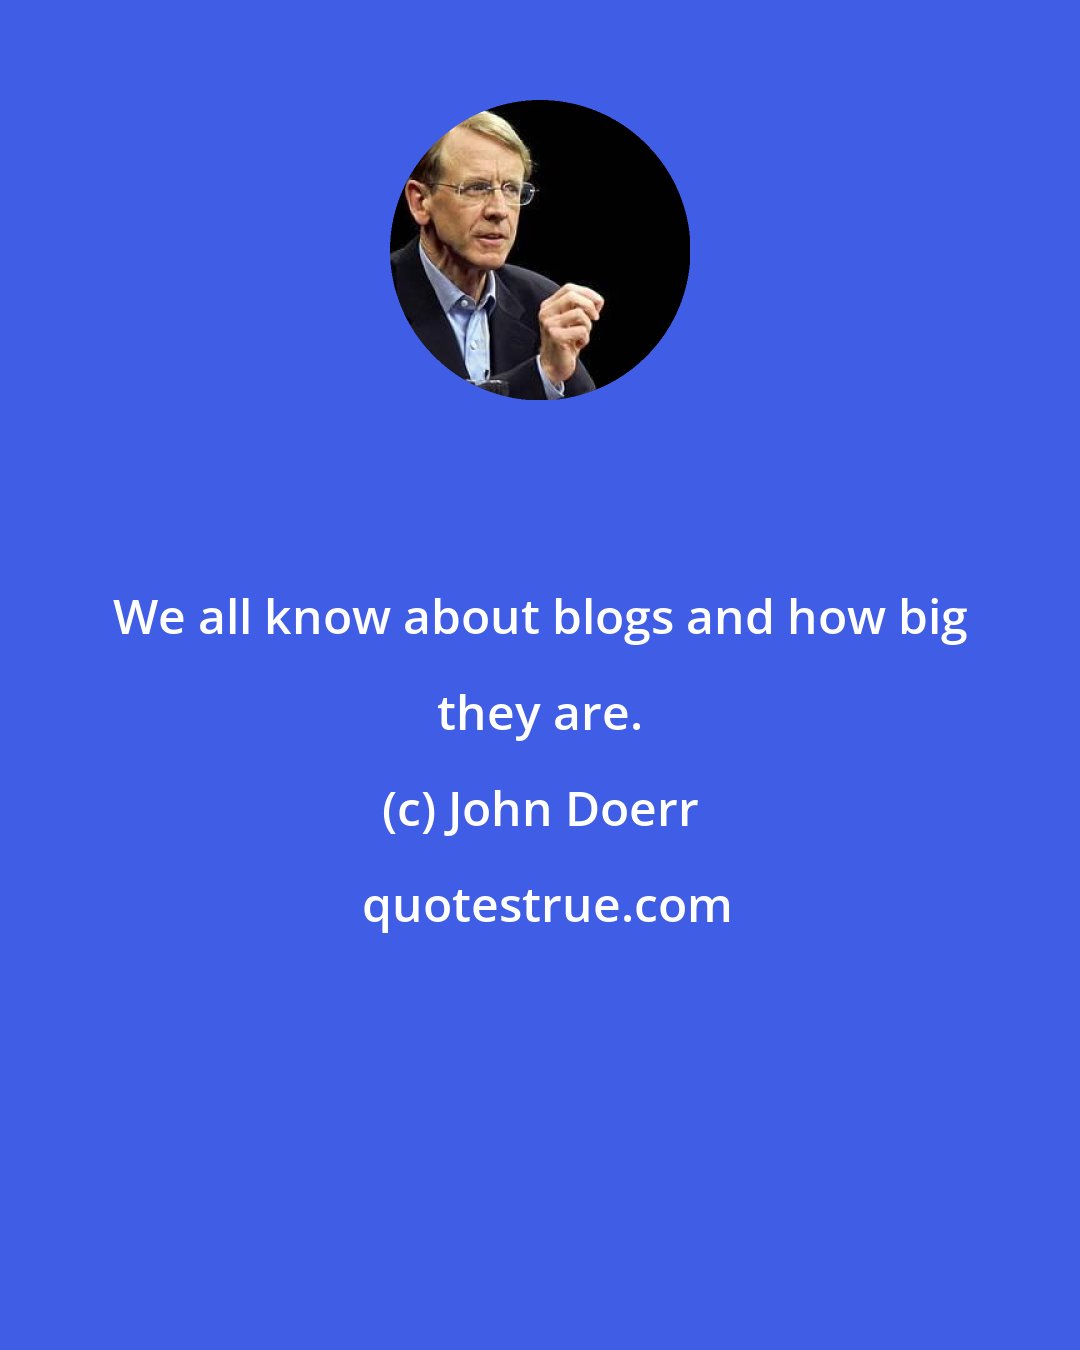 John Doerr: We all know about blogs and how big they are.